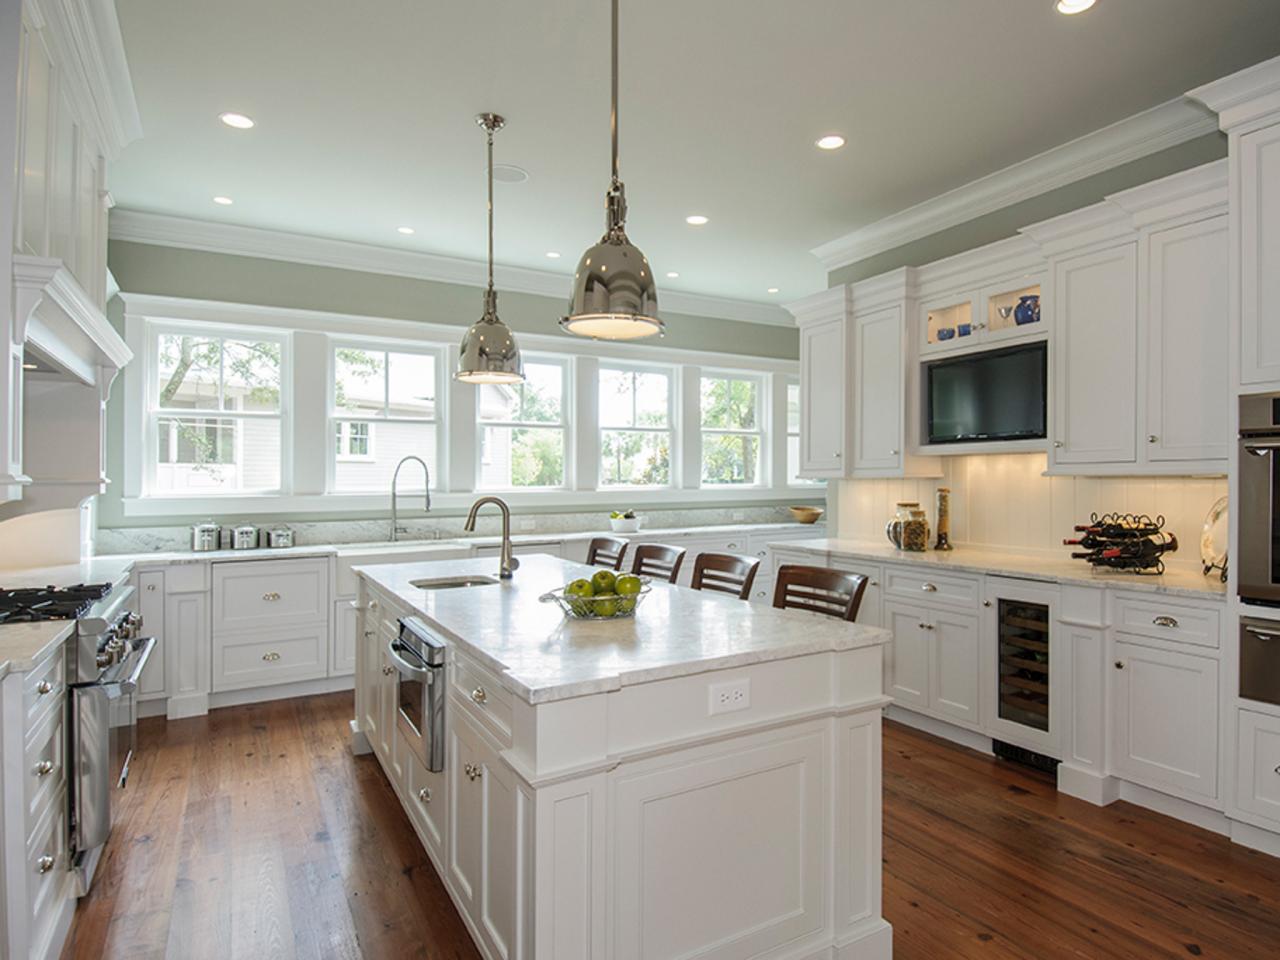 Painting Kitchen Cabinets Antique White, What Is A Good White To Paint Kitchen Cabinets